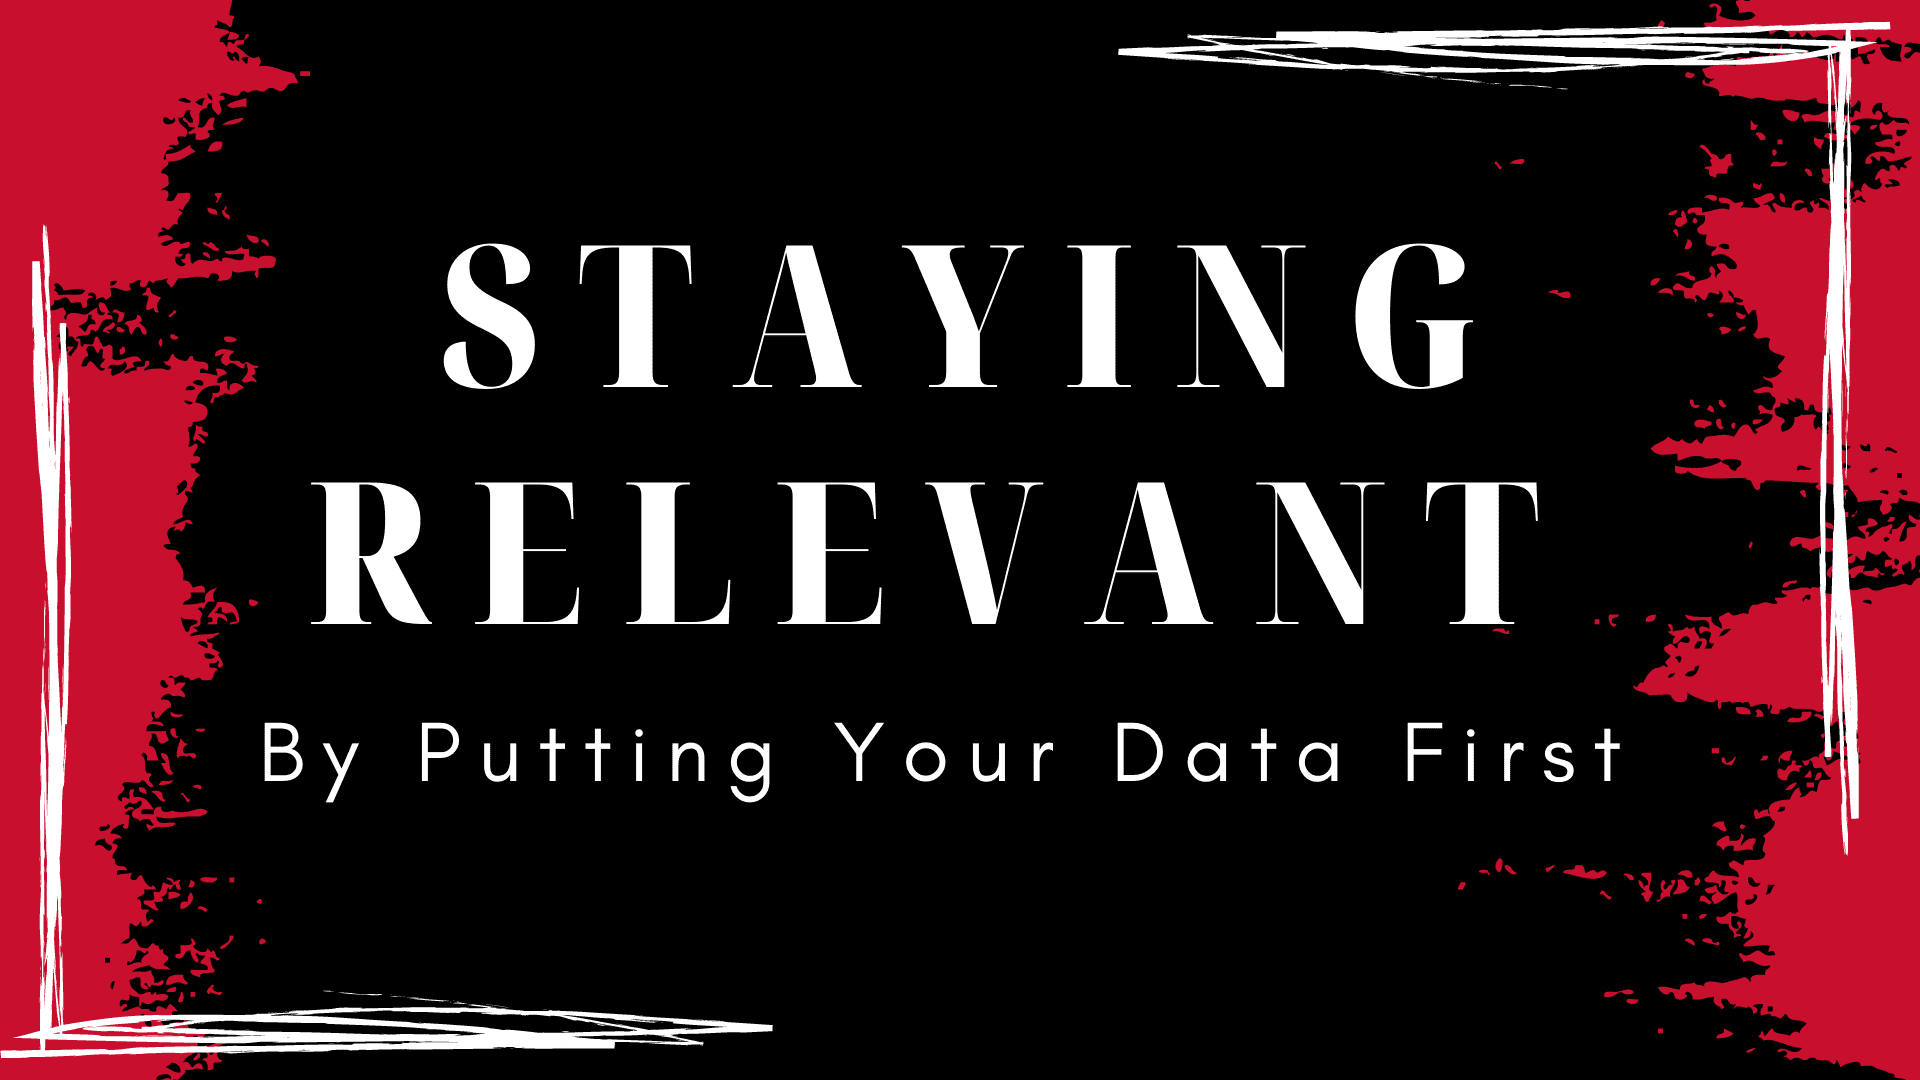 "Staying Relevant By Putting Your Data First" Hero